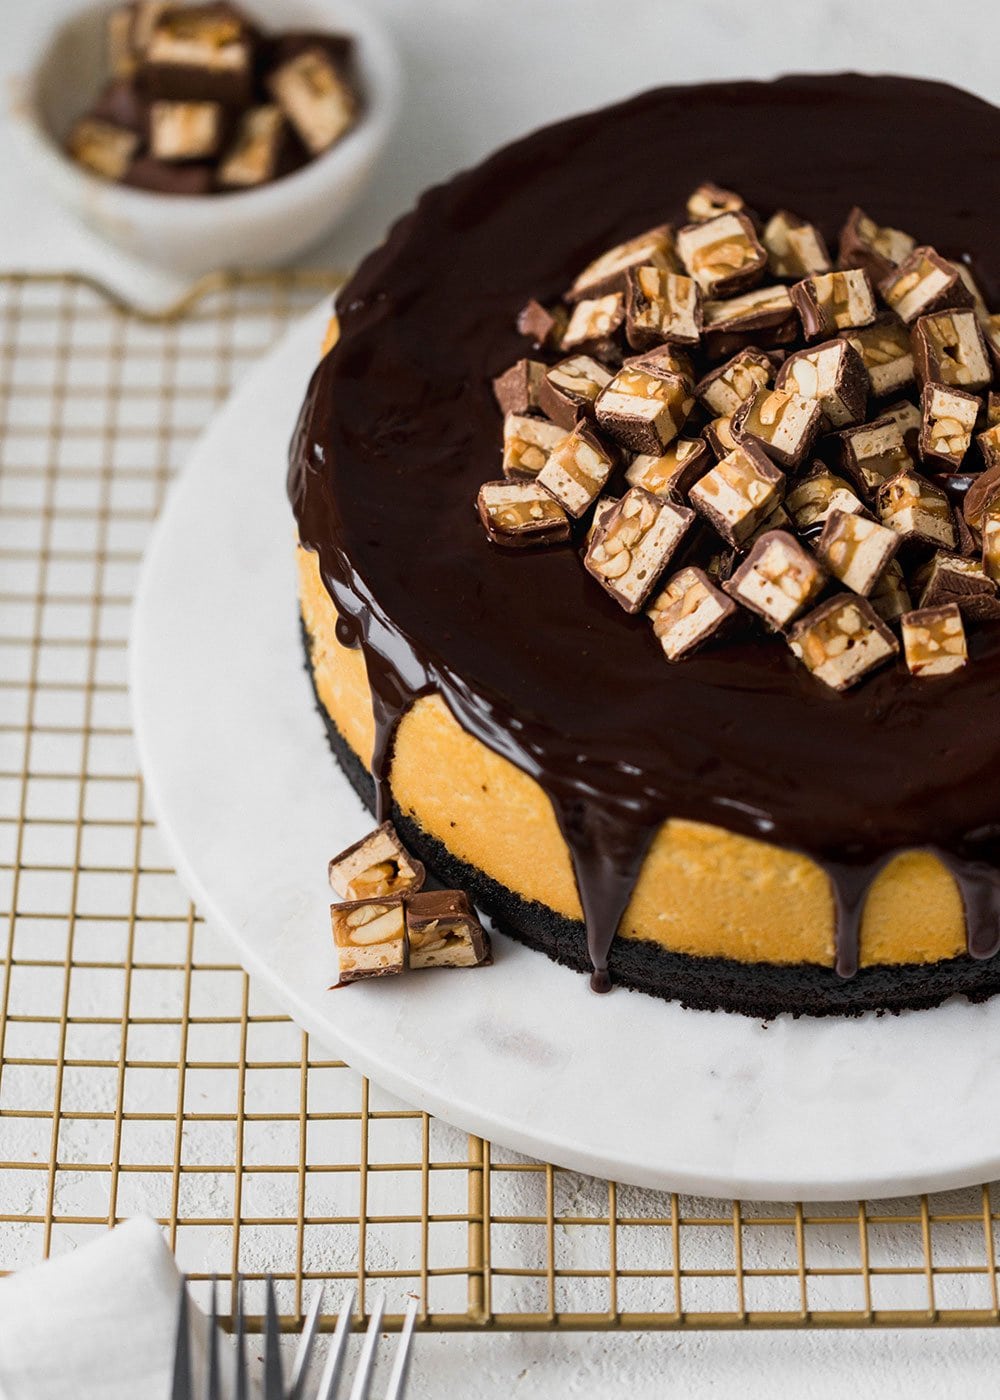 Snickers Cheesecake with Oreo crust, cheesecake filling loaded with Snickers, thick chocolate ganache, and more Snickers on top! Ultimate decadence.